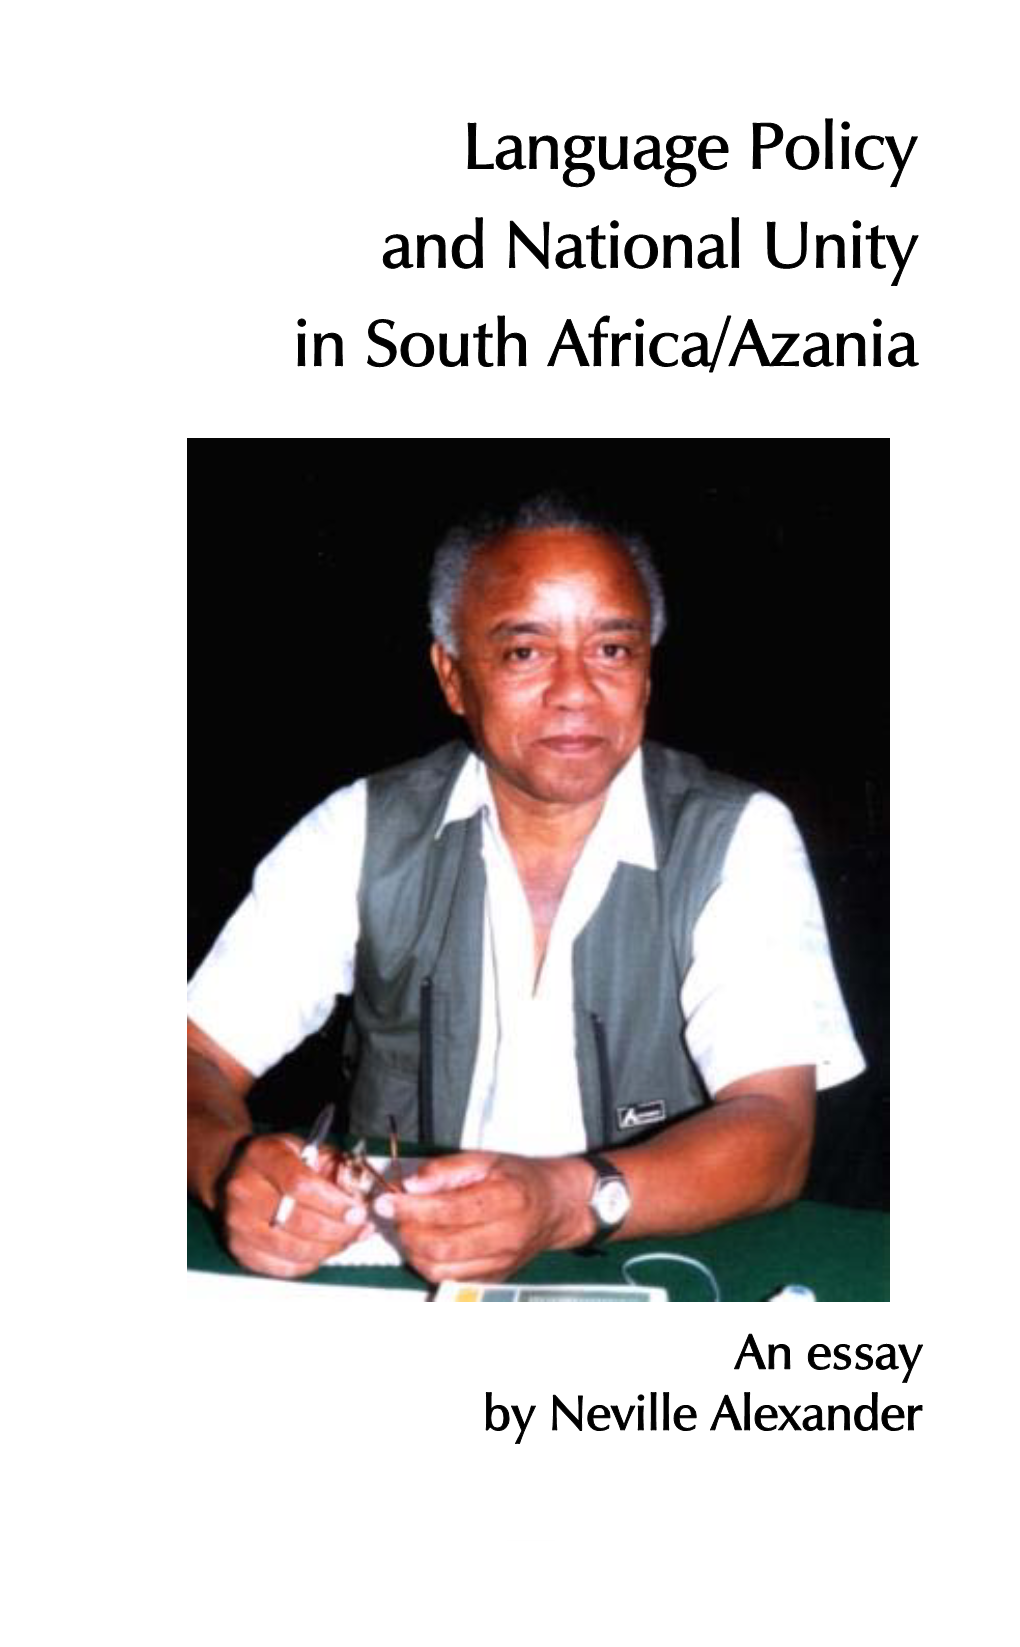 Language Policy and National Unity in South Africa/Azania Was First Published by Buchu Books in 1989